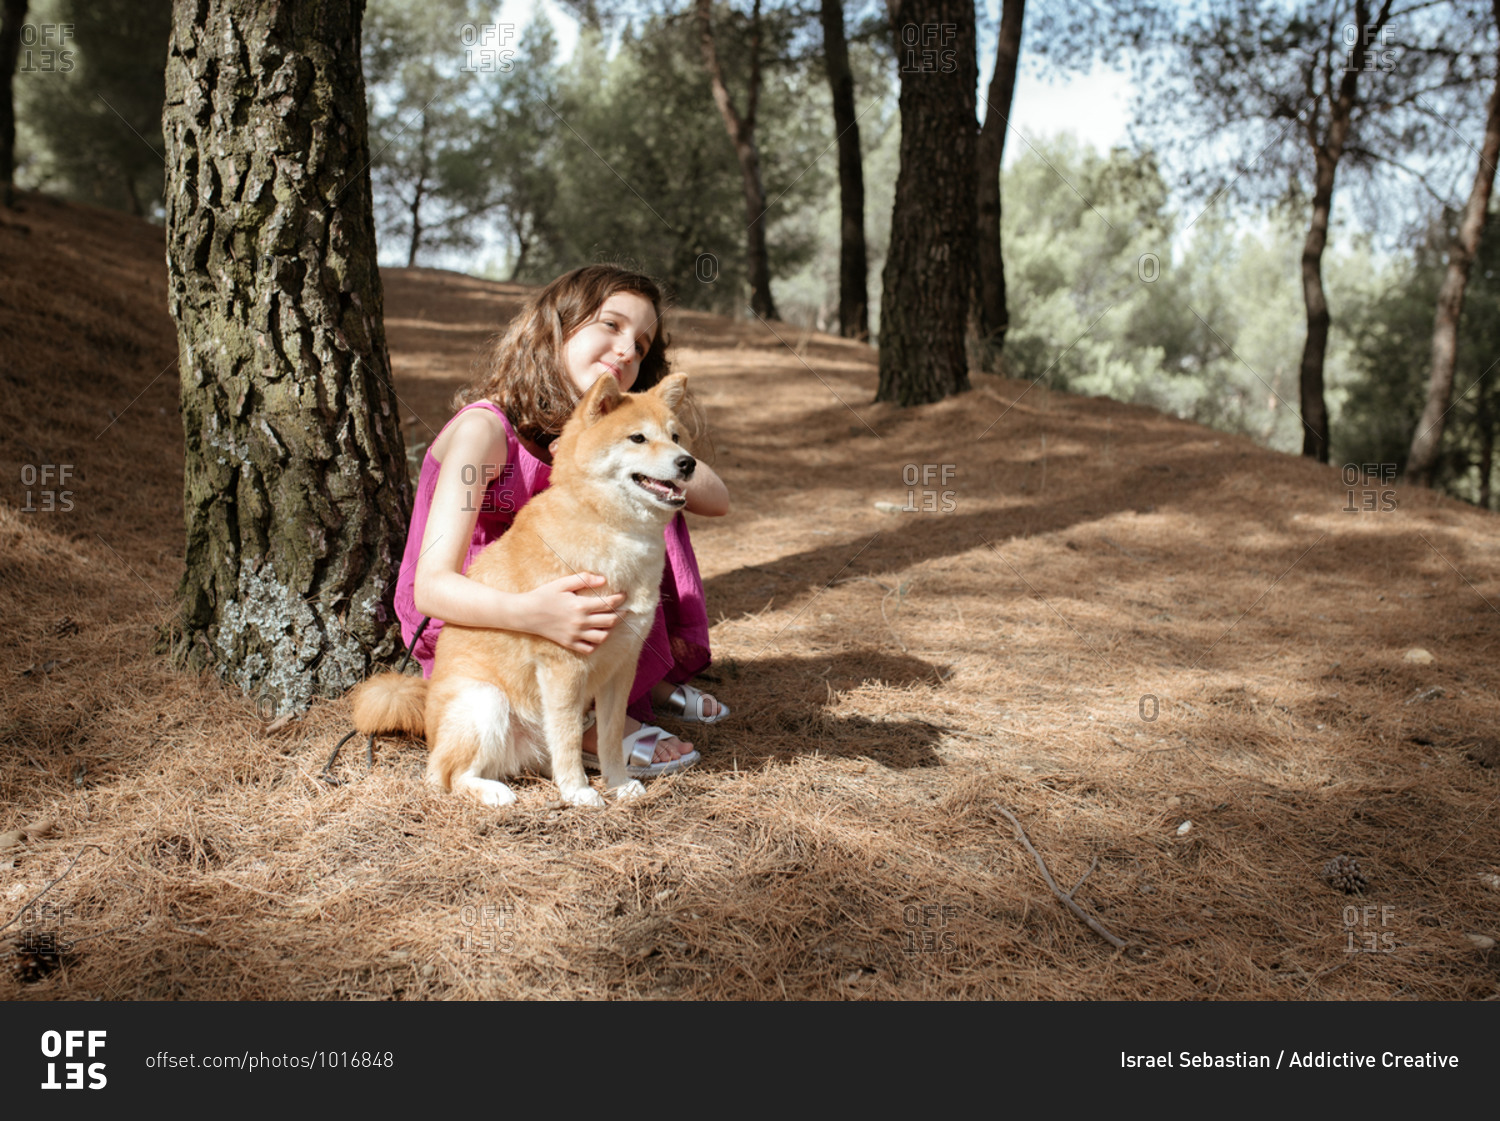 Full length of positive tranquil little girl embracing adorable Shiba Inu dog while sitting together near tree trunk in summer forest